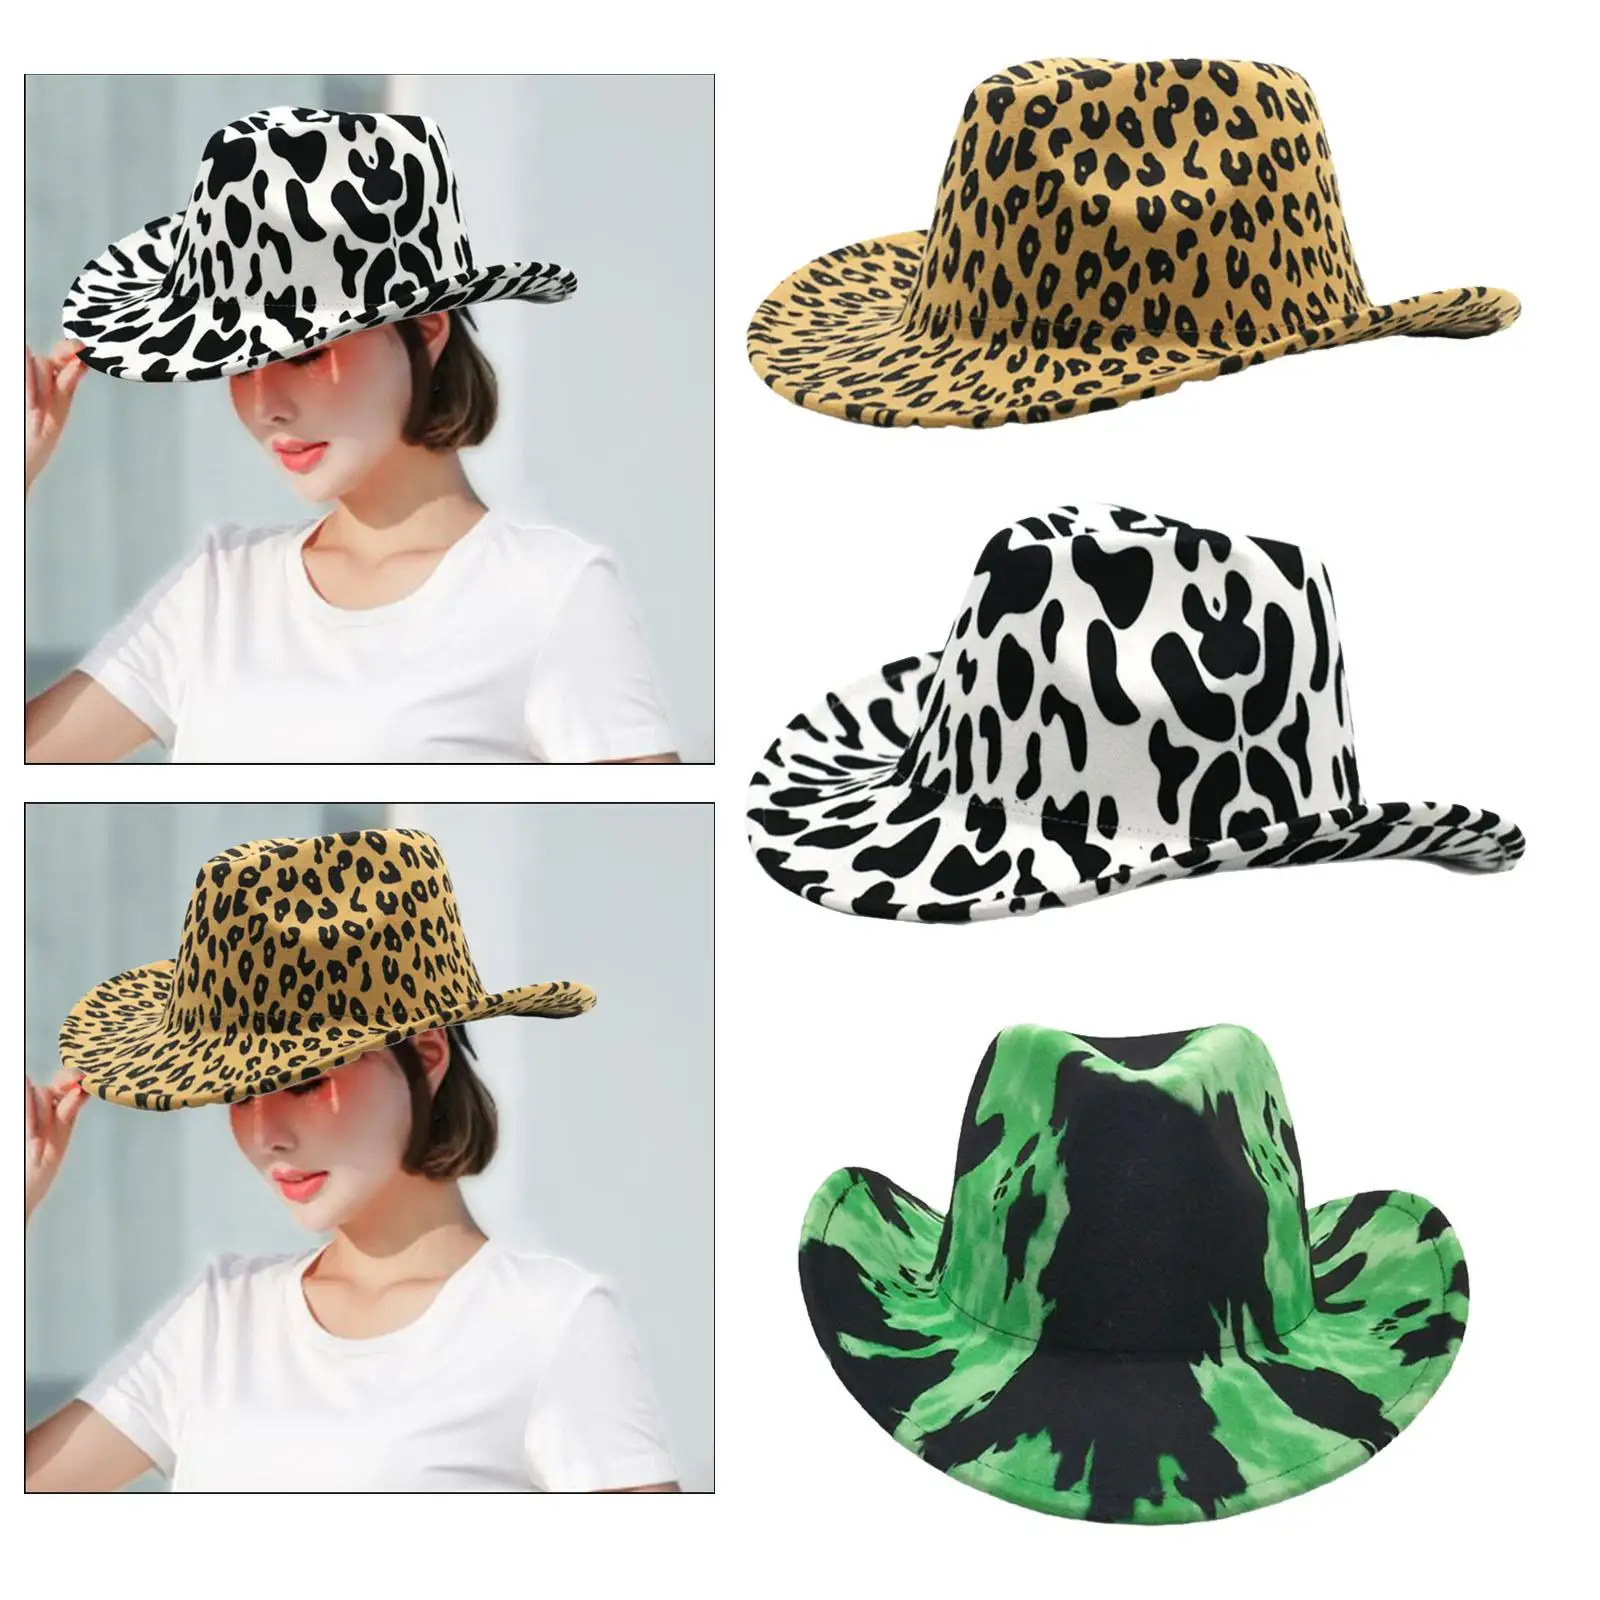 Cowboy Hat Cow Print Unisex Hat Stylsih Womens Hats with Brim Cowgirl Hat Women Hats for Halloween Party Festival